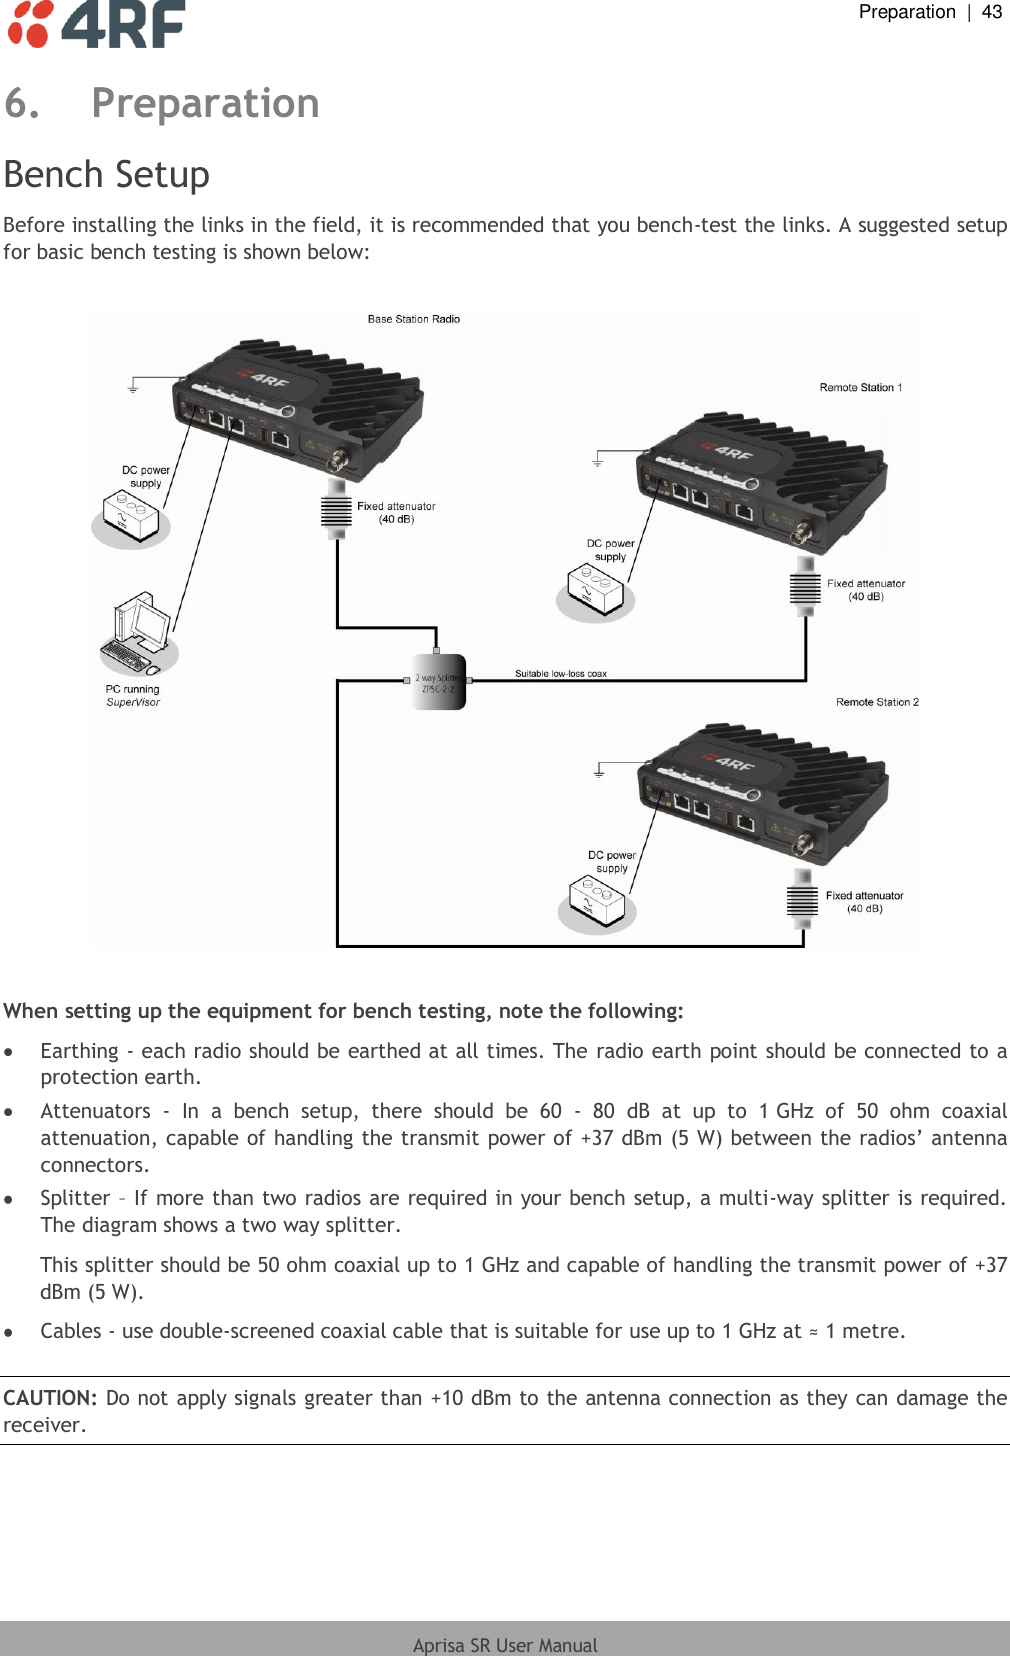  Preparation  |  43  Aprisa SR User Manual  6. Preparation Bench Setup Before installing the links in the field, it is recommended that you bench-test the links. A suggested setup for basic bench testing is shown below:    When setting up the equipment for bench testing, note the following:  Earthing - each radio should be earthed at all times. The radio earth point should be connected to a protection earth.  Attenuators  -  In  a  bench  setup,  there  should  be  60  -  80  dB  at  up  to  1 GHz  of  50  ohm  coaxial attenuation, capable of handling the transmit power of +37 dBm (5 W) between the radios’ antenna connectors.  Splitter – If more than two radios are required in your bench setup, a multi-way splitter is required.  The diagram shows a two way splitter. This splitter should be 50 ohm coaxial up to 1 GHz and capable of handling the transmit power of +37 dBm (5 W).  Cables - use double-screened coaxial cable that is suitable for use up to 1 GHz at ≈ 1 metre.  CAUTION: Do not apply signals greater than +10 dBm to the antenna connection as they can damage the receiver.  